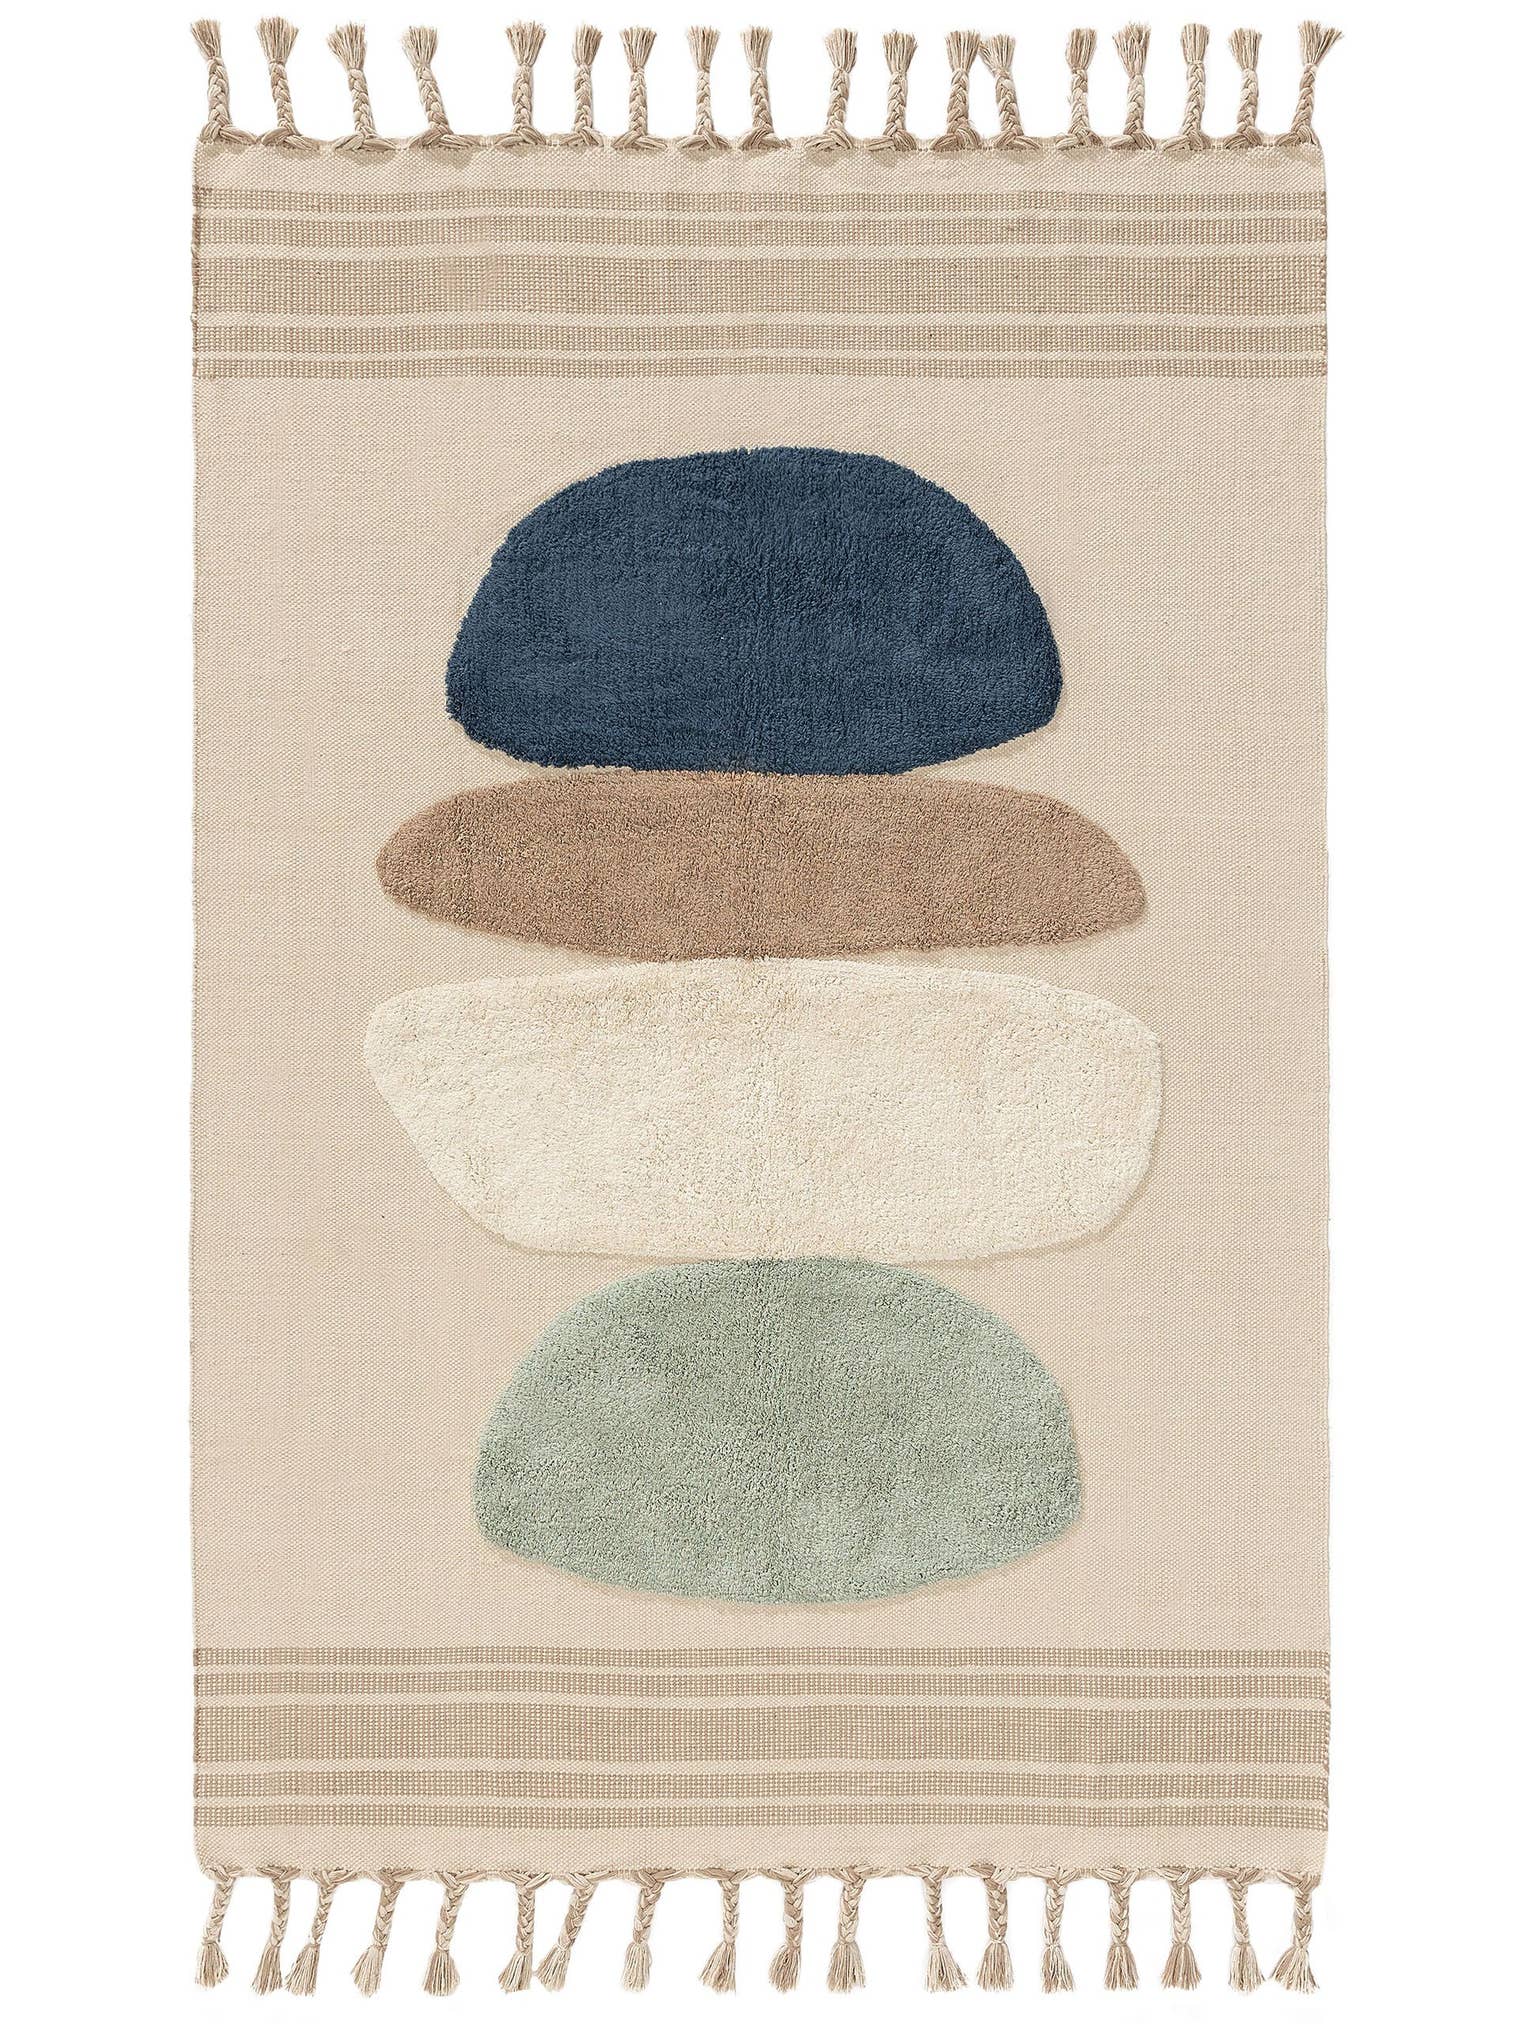 Rug made of 100% Cotton in Blue with a 1- 5 mm high pile by benuta Pop